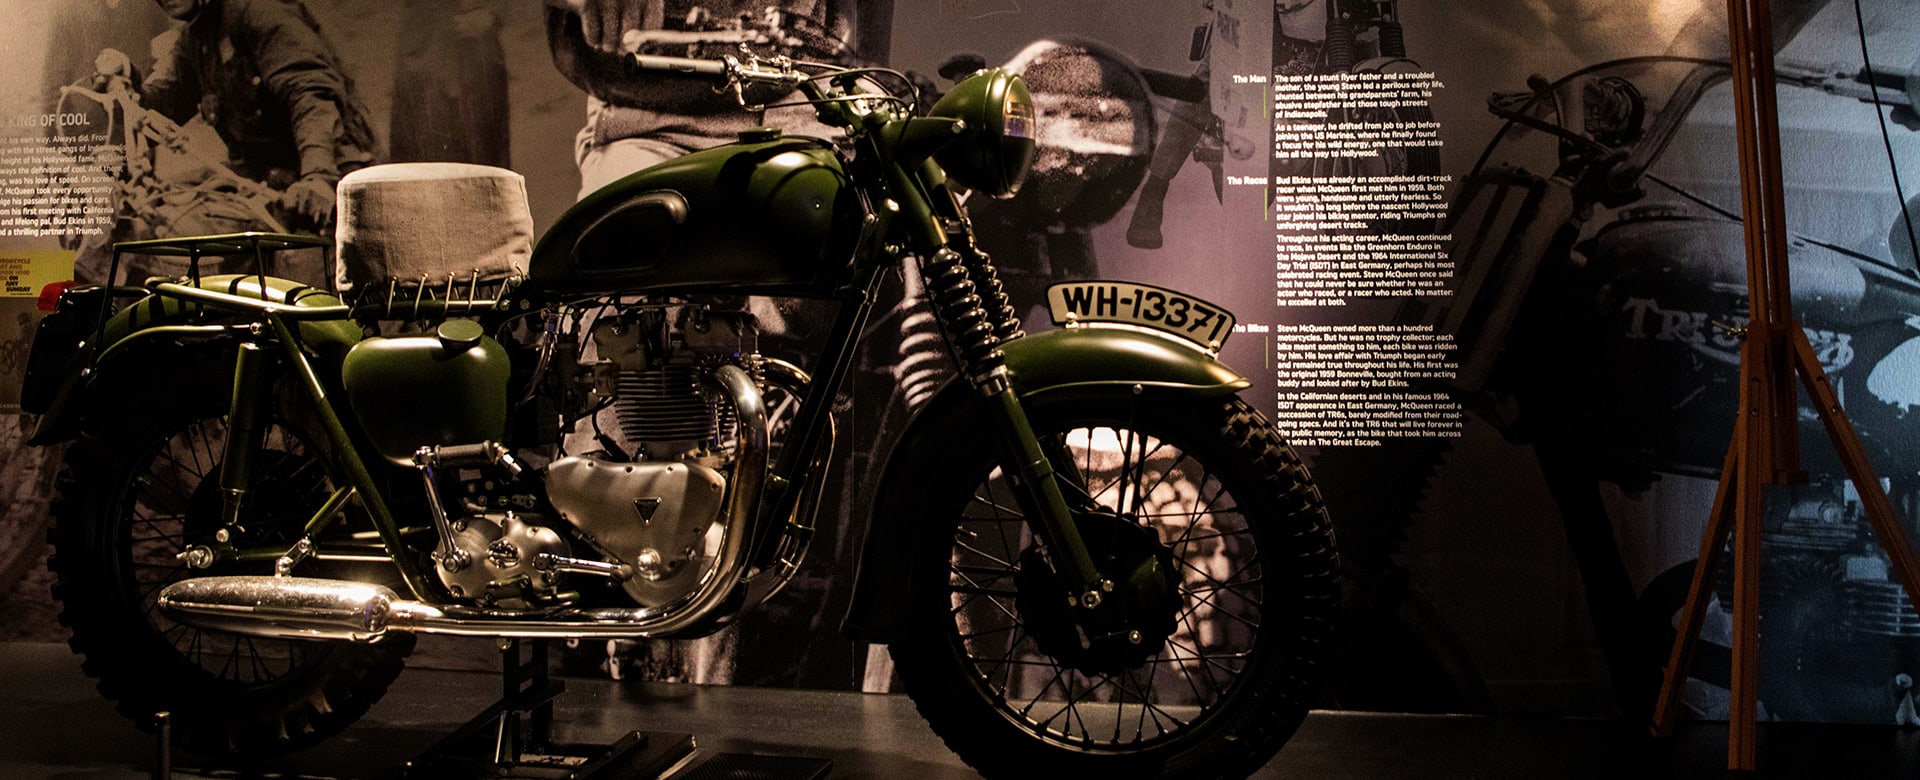 Triumph motorcycle at the factory visitor experiences 